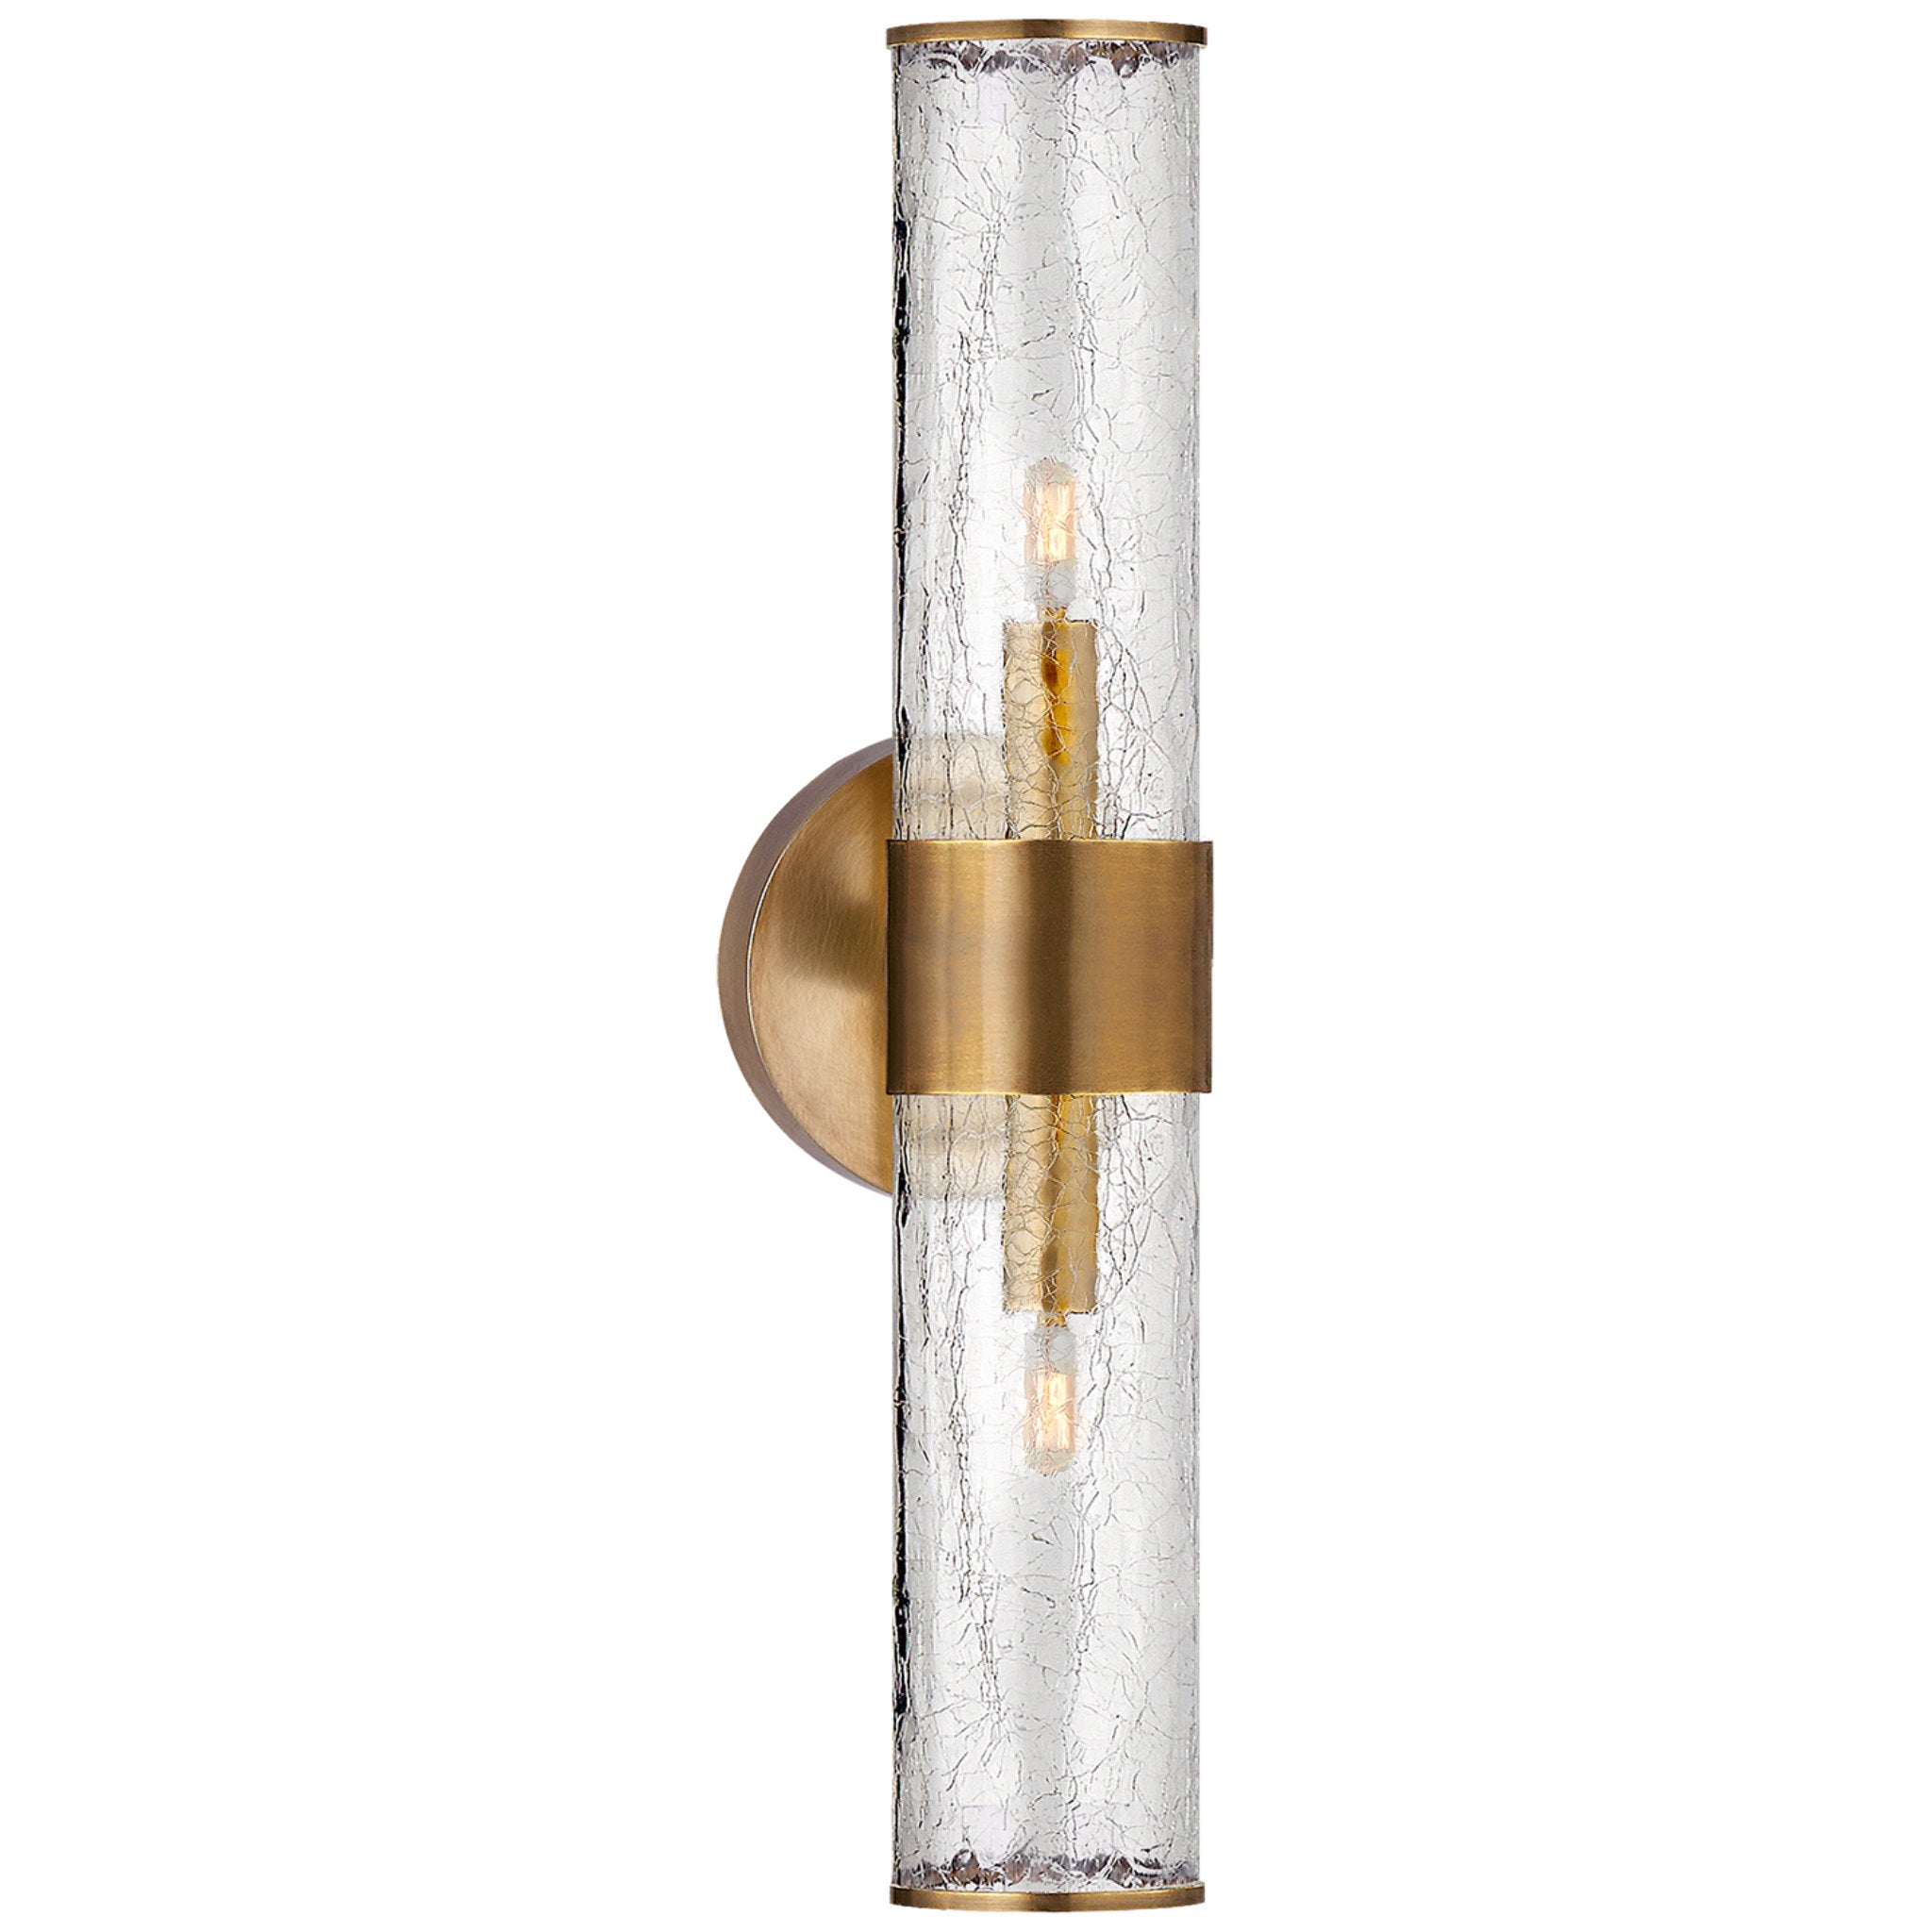 Kelly Wearstler Liaison Medium Sconce in Antique-Burnished Brass with Crackle Glass